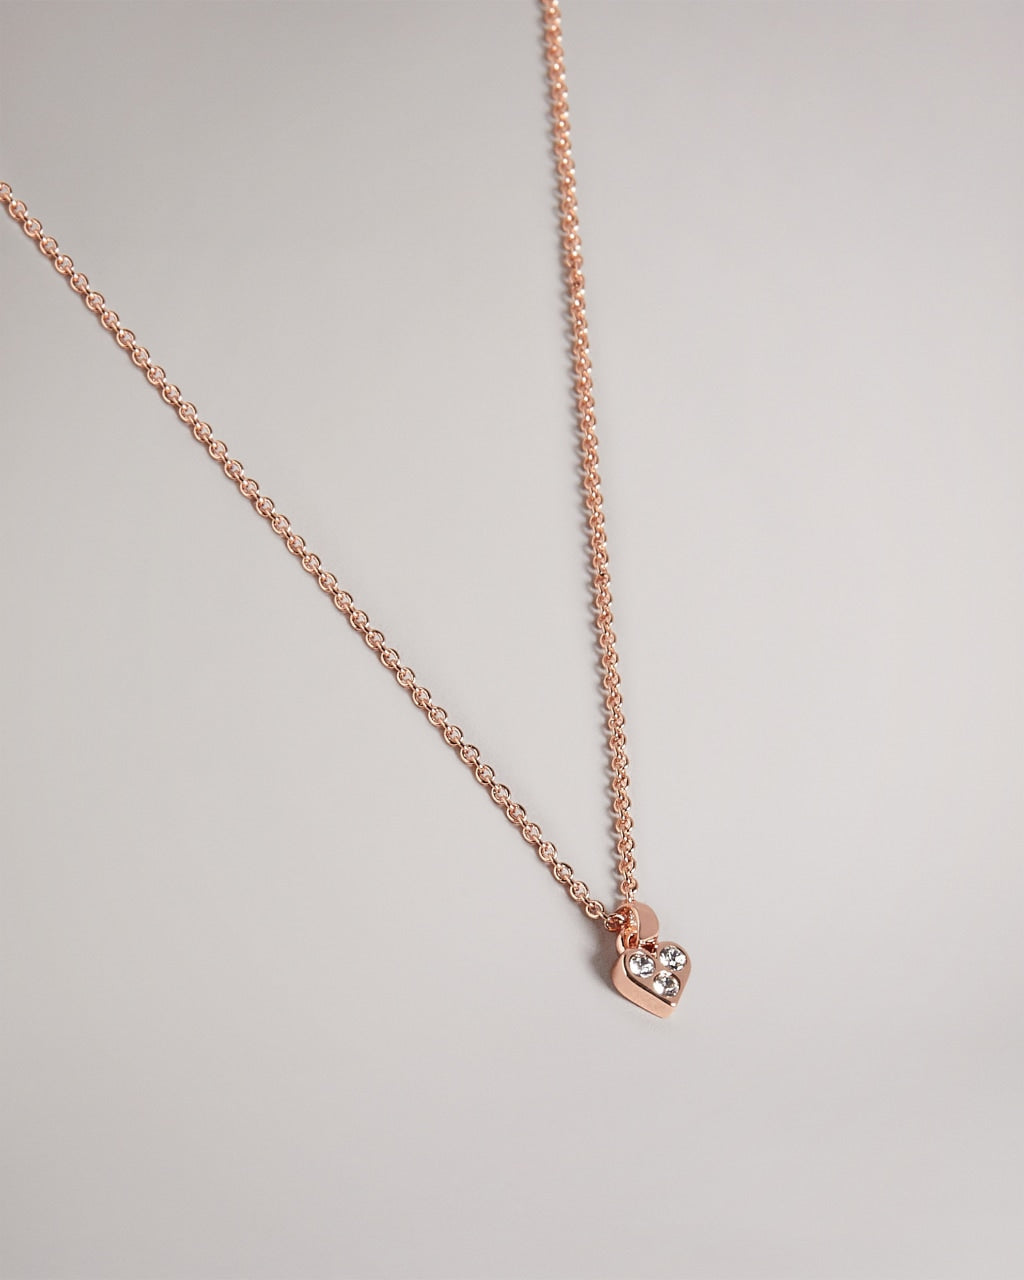 Neeno Nano Heart Pendant in Rose Gold | eightywingold - official partner of Ted Baker